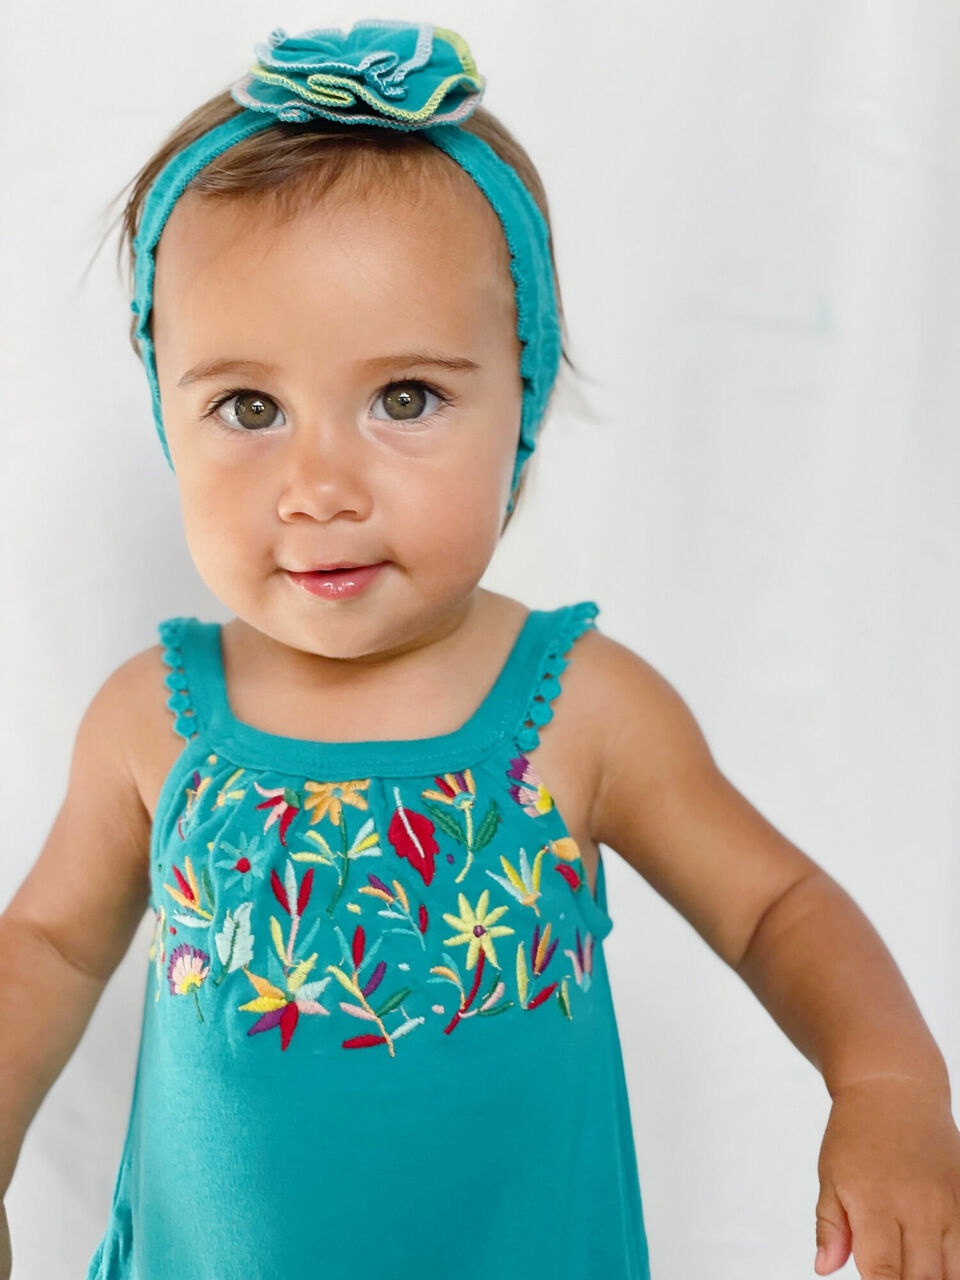 Child wearing Embroidered Twirl Dress w/Pockets in Teal Floral.